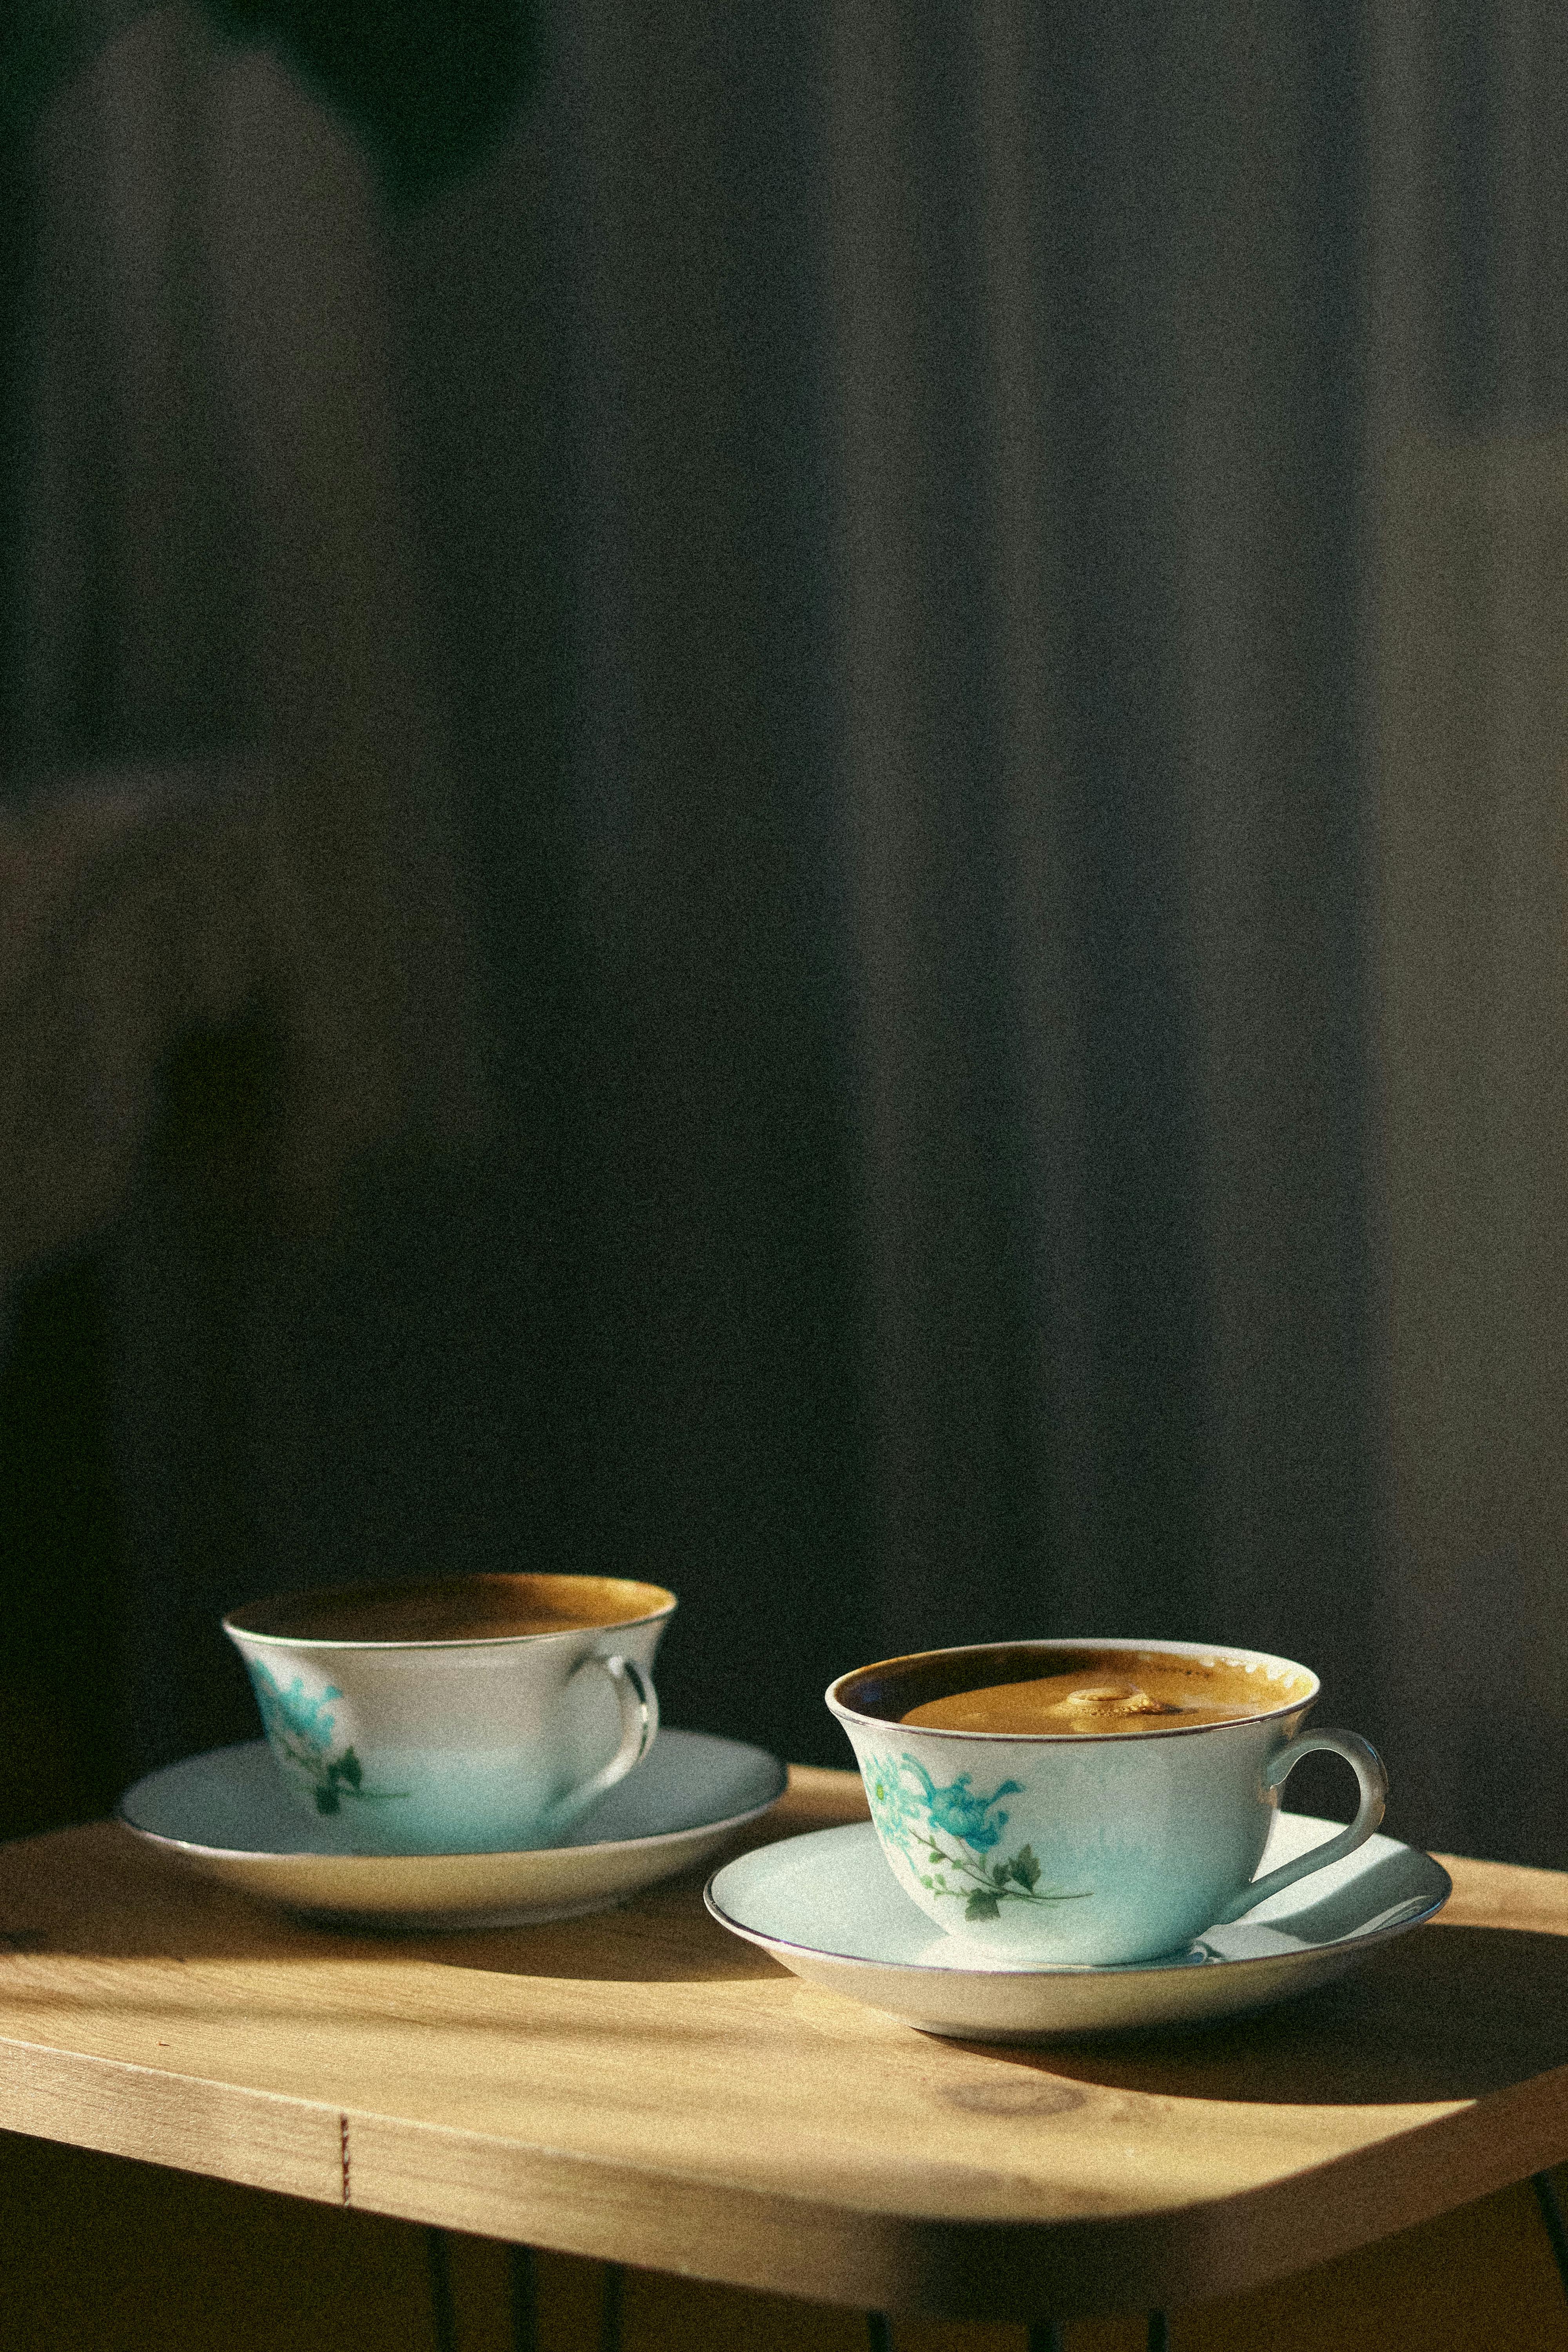 Two cups of coffee | Source: Pexels